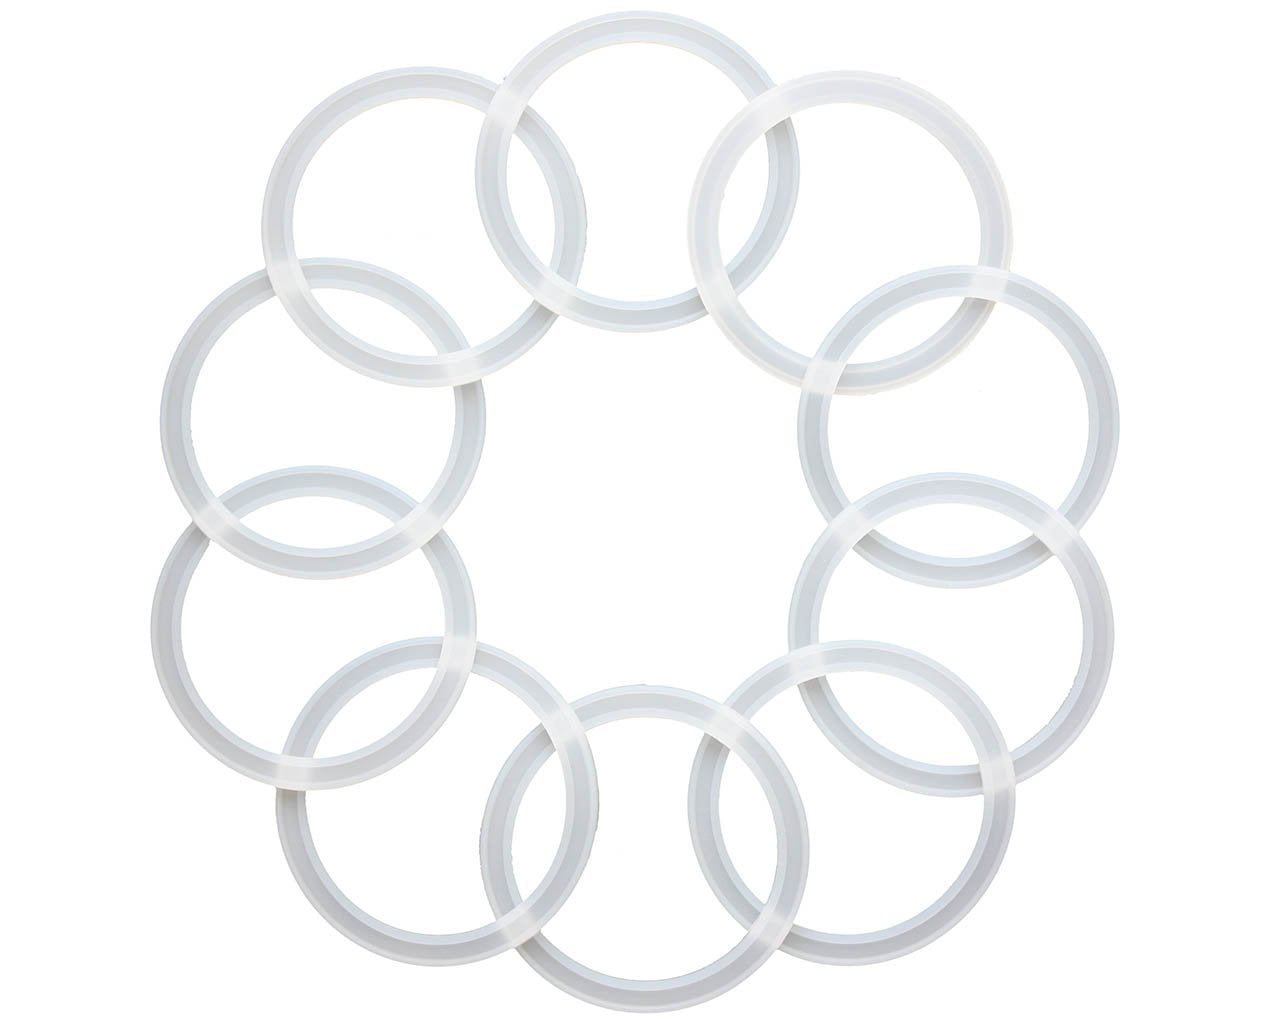 Leak Proof Lids Silicone Sealing Rings Gaskets Seal for Mason Jars Glass Caps 